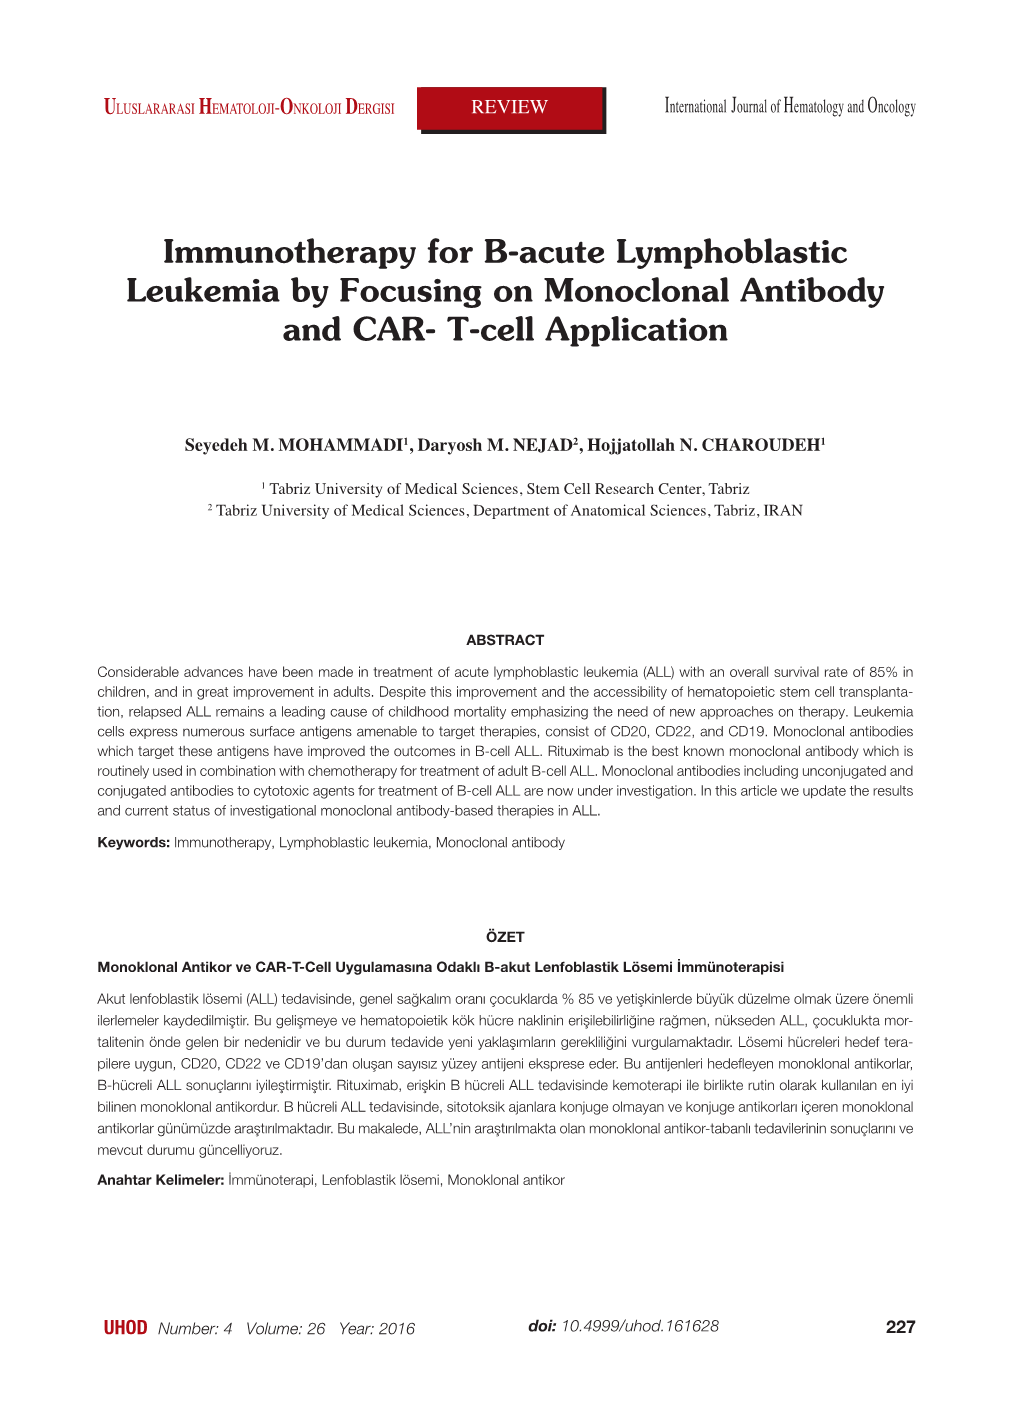 Immunotherapy for B-Acute Lymphoblastic Leukemia by Focusing on Monoclonal Antibody and CAR- T-Cell Application